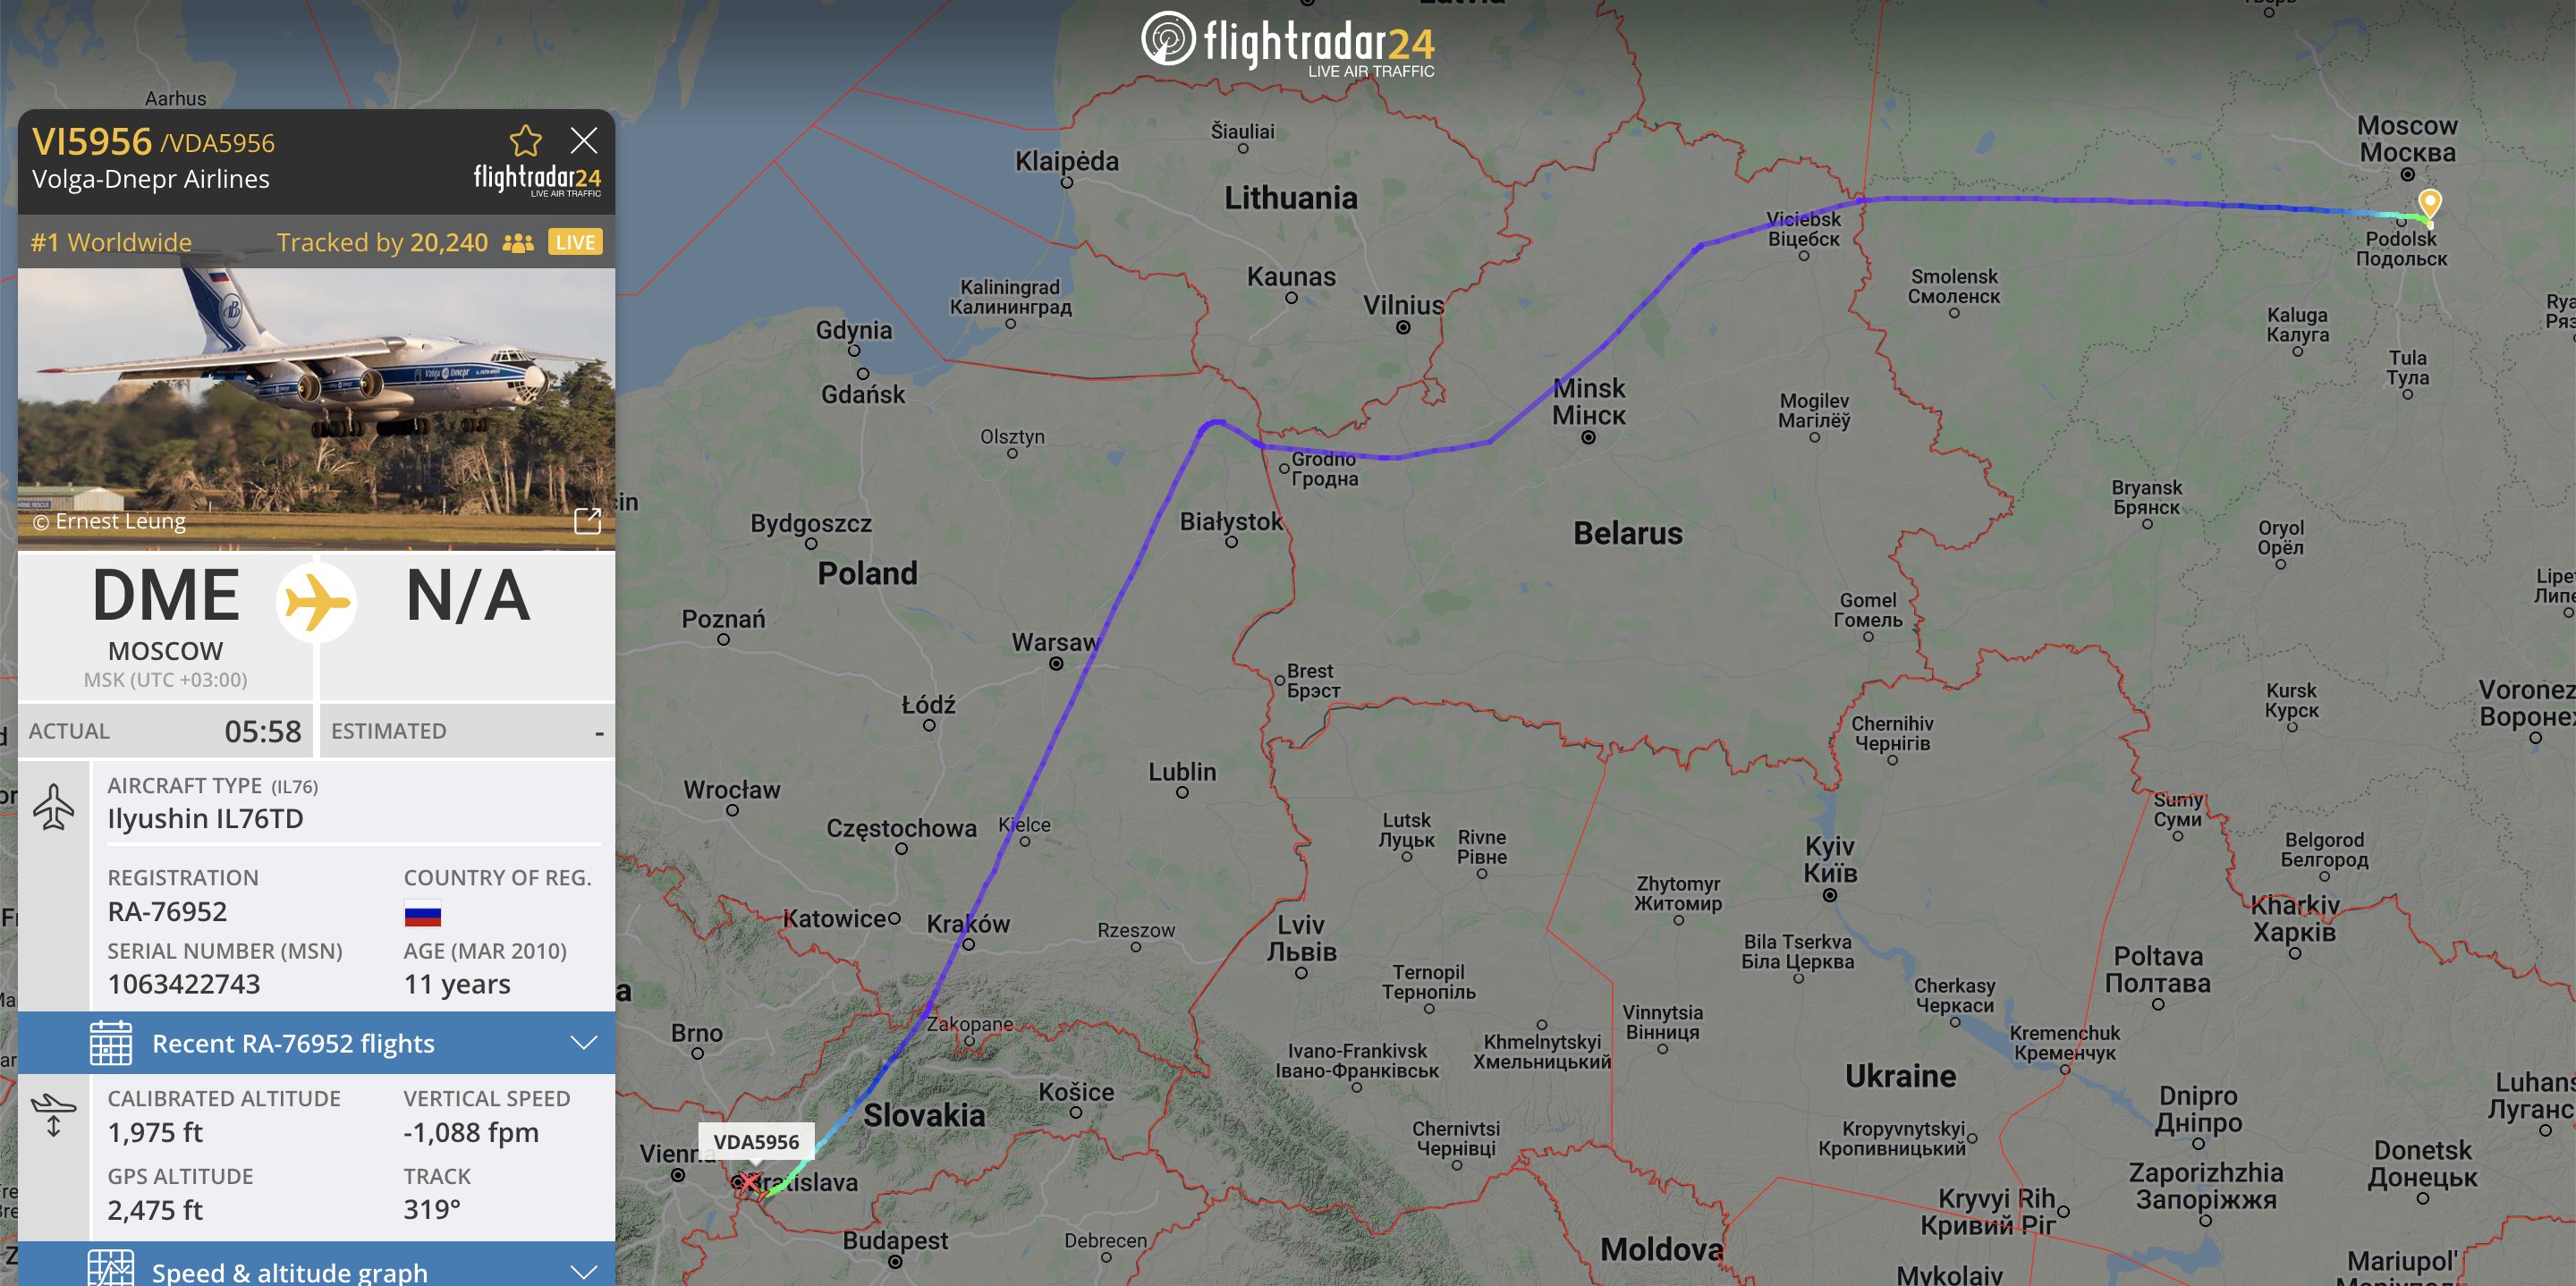 Flightradar24 on Twitter: "A Volga Dnepr Airlines IL-76 has just landed in  Bratislava, Slovakia from Moscow. Unknown at the moment is the reason  special permission was granted to this flight to overfly